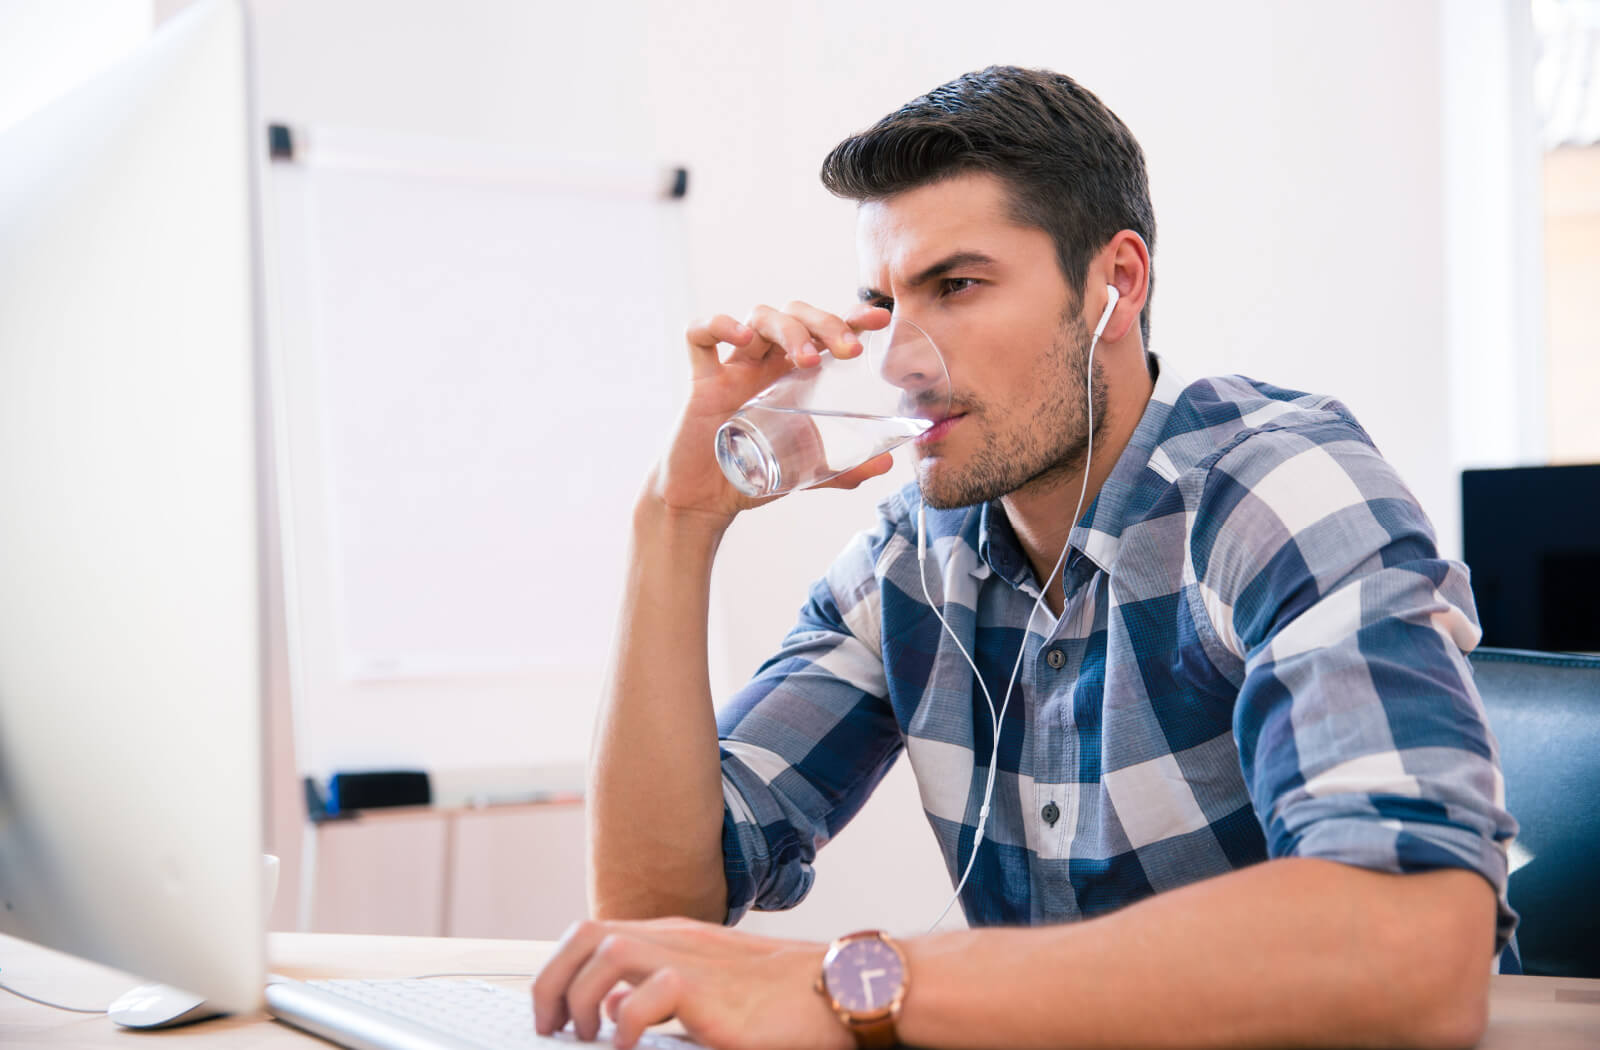 A man drinking a glass of water while working.